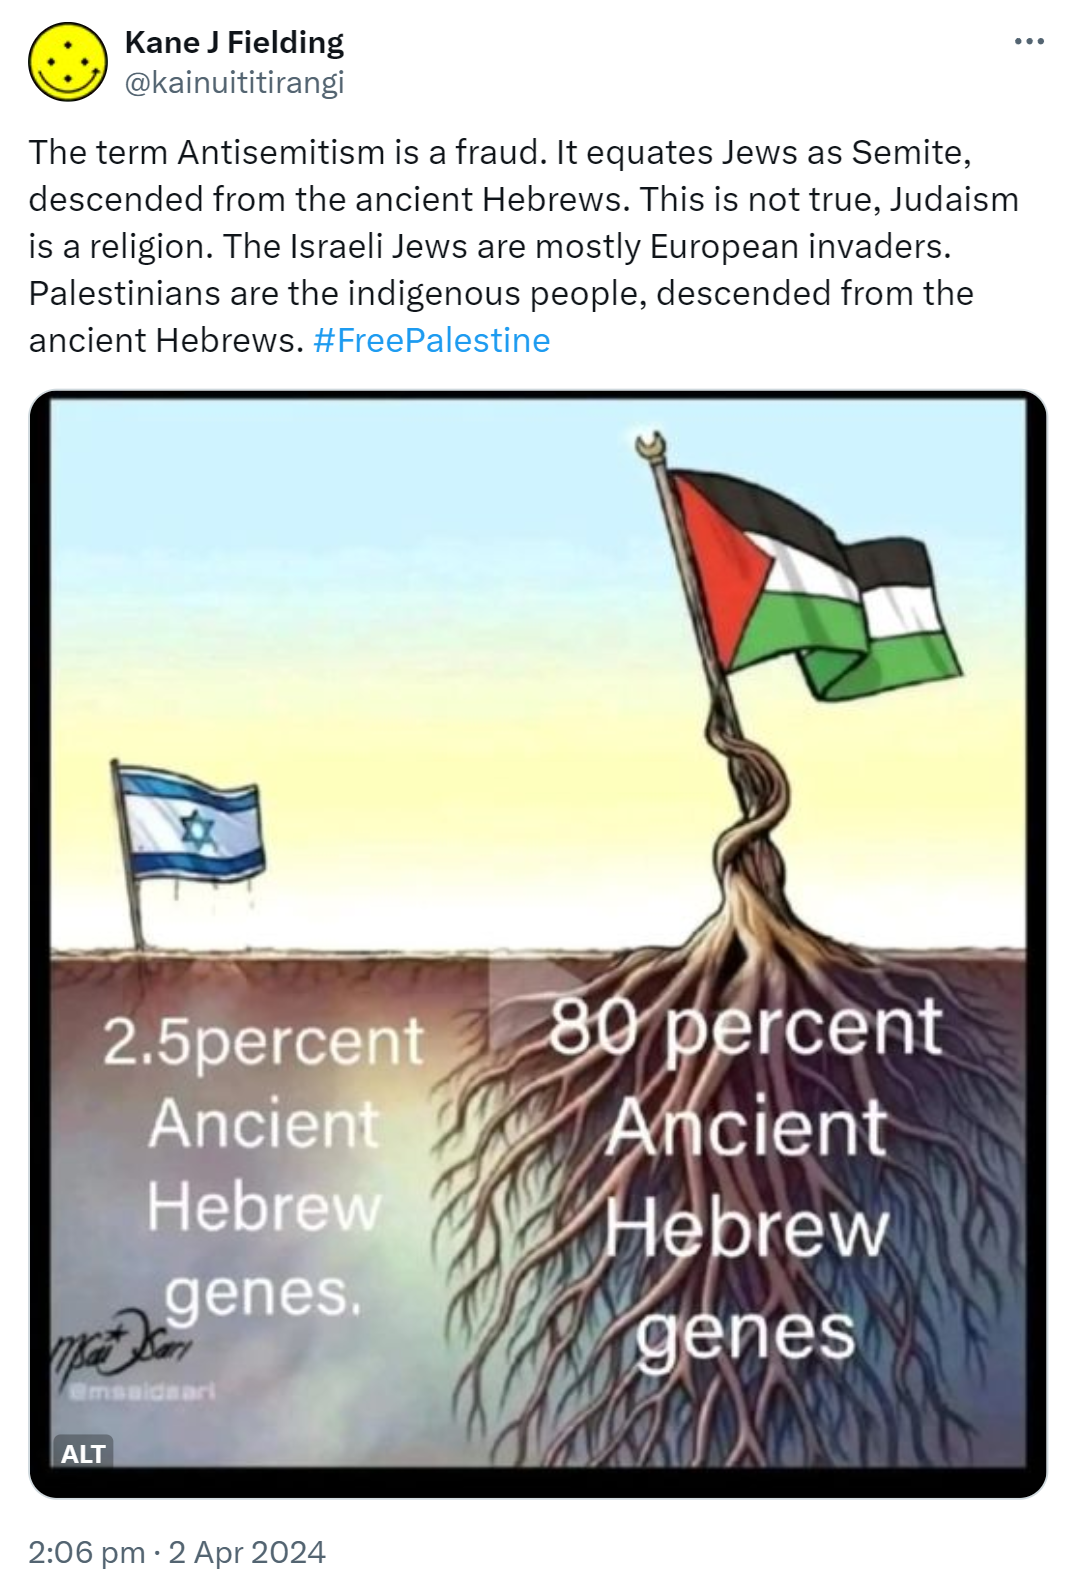 The term Antisemitism is a fraud. It equates Jews as Semite, descended from the ancient Hebrews. This is not true, Judaism is a religion. The Israeli Jews are mostly European invaders. Palestinians are the indigenous people, descended from the ancient Hebrews. Hashtag Free Palestine 2:06 pm · 2 Apr 2024.